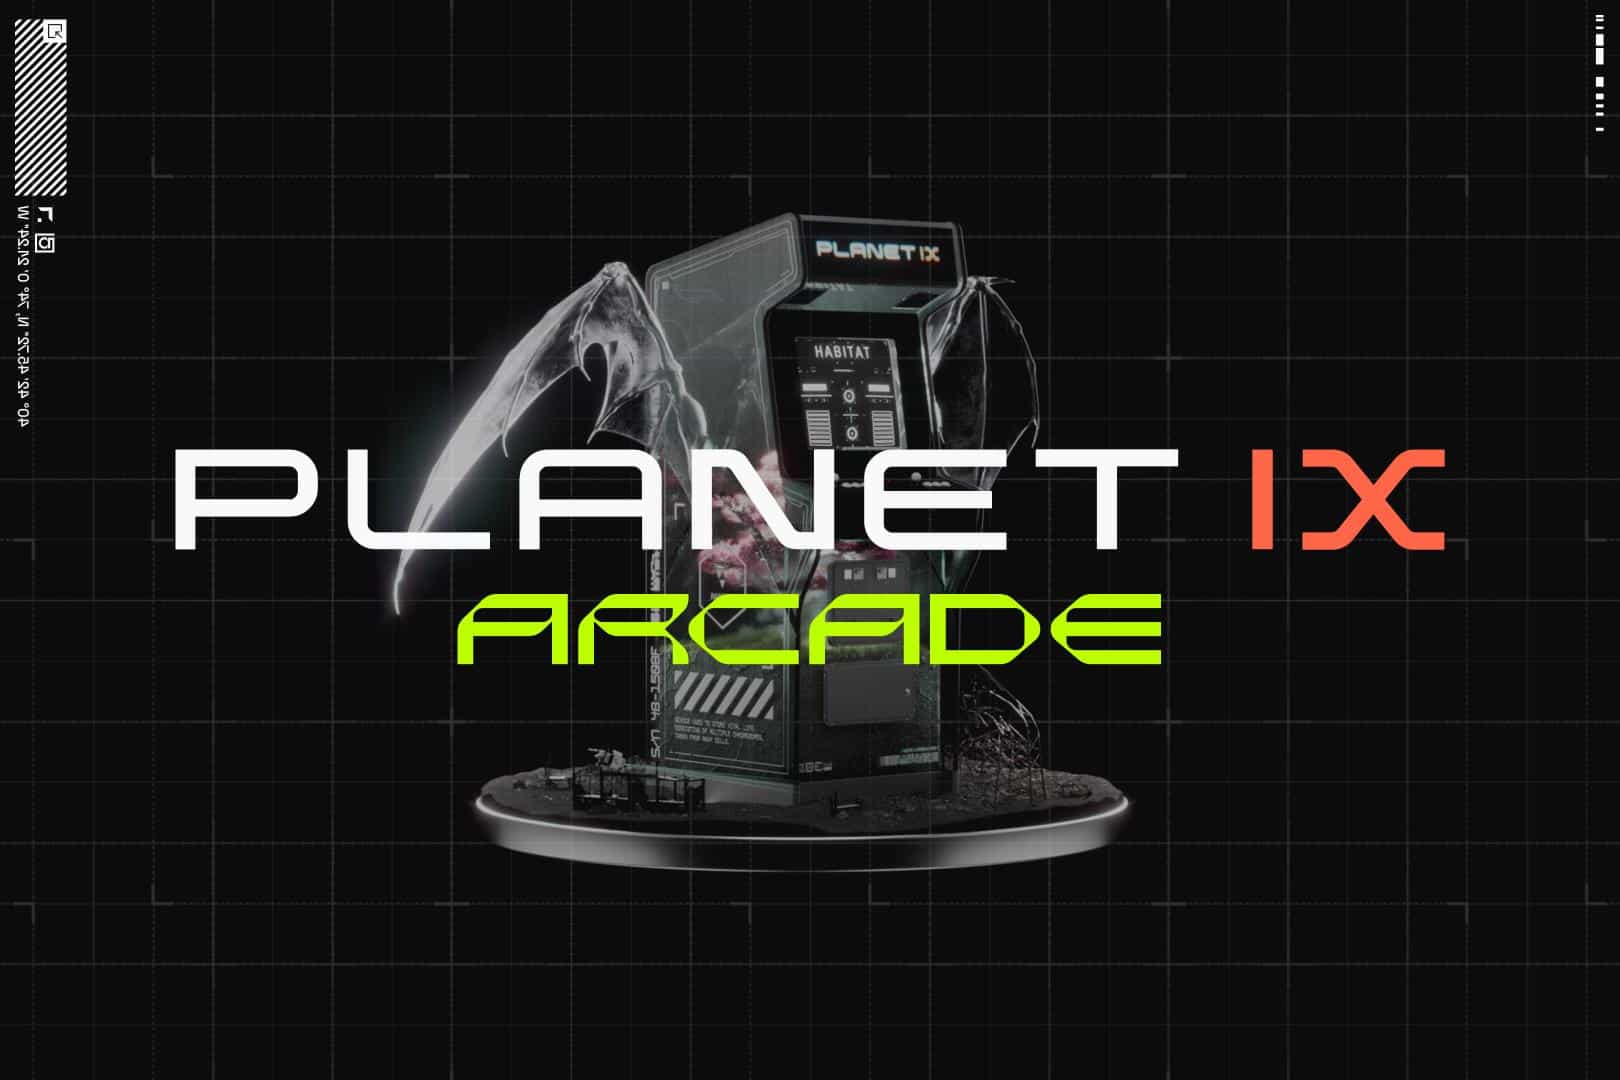 Planet-ix-is-creating-a-new-framework-for-esports-by-implementing-on-chain-gaming